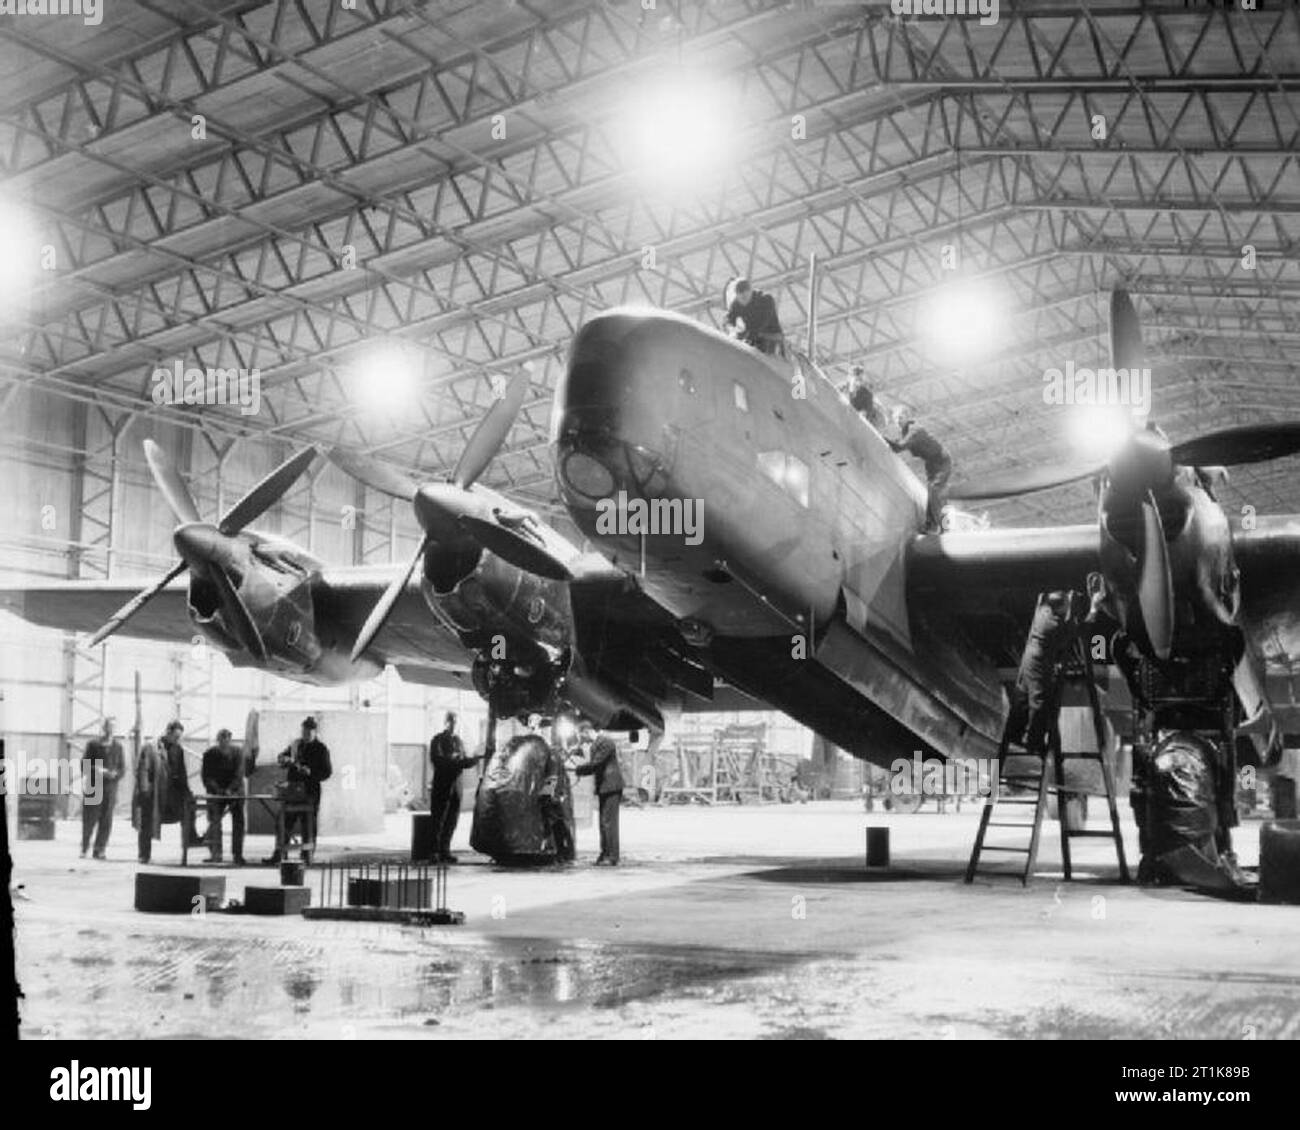 IWM text : 'Royal Air Force Bomber Command, 1942-1945. A Handley Page Halifax B Mark III Series 1A of No. 1663 Heavy Conversion Unit undergoes maintenance at night in a T2 Type hangar at Rufforth, Yorkshire'. Comment : This has Merlin engines so it can't be a Mk III. Appears to be a B Mk II Series I as it has no nose gun provision. Stock Photo